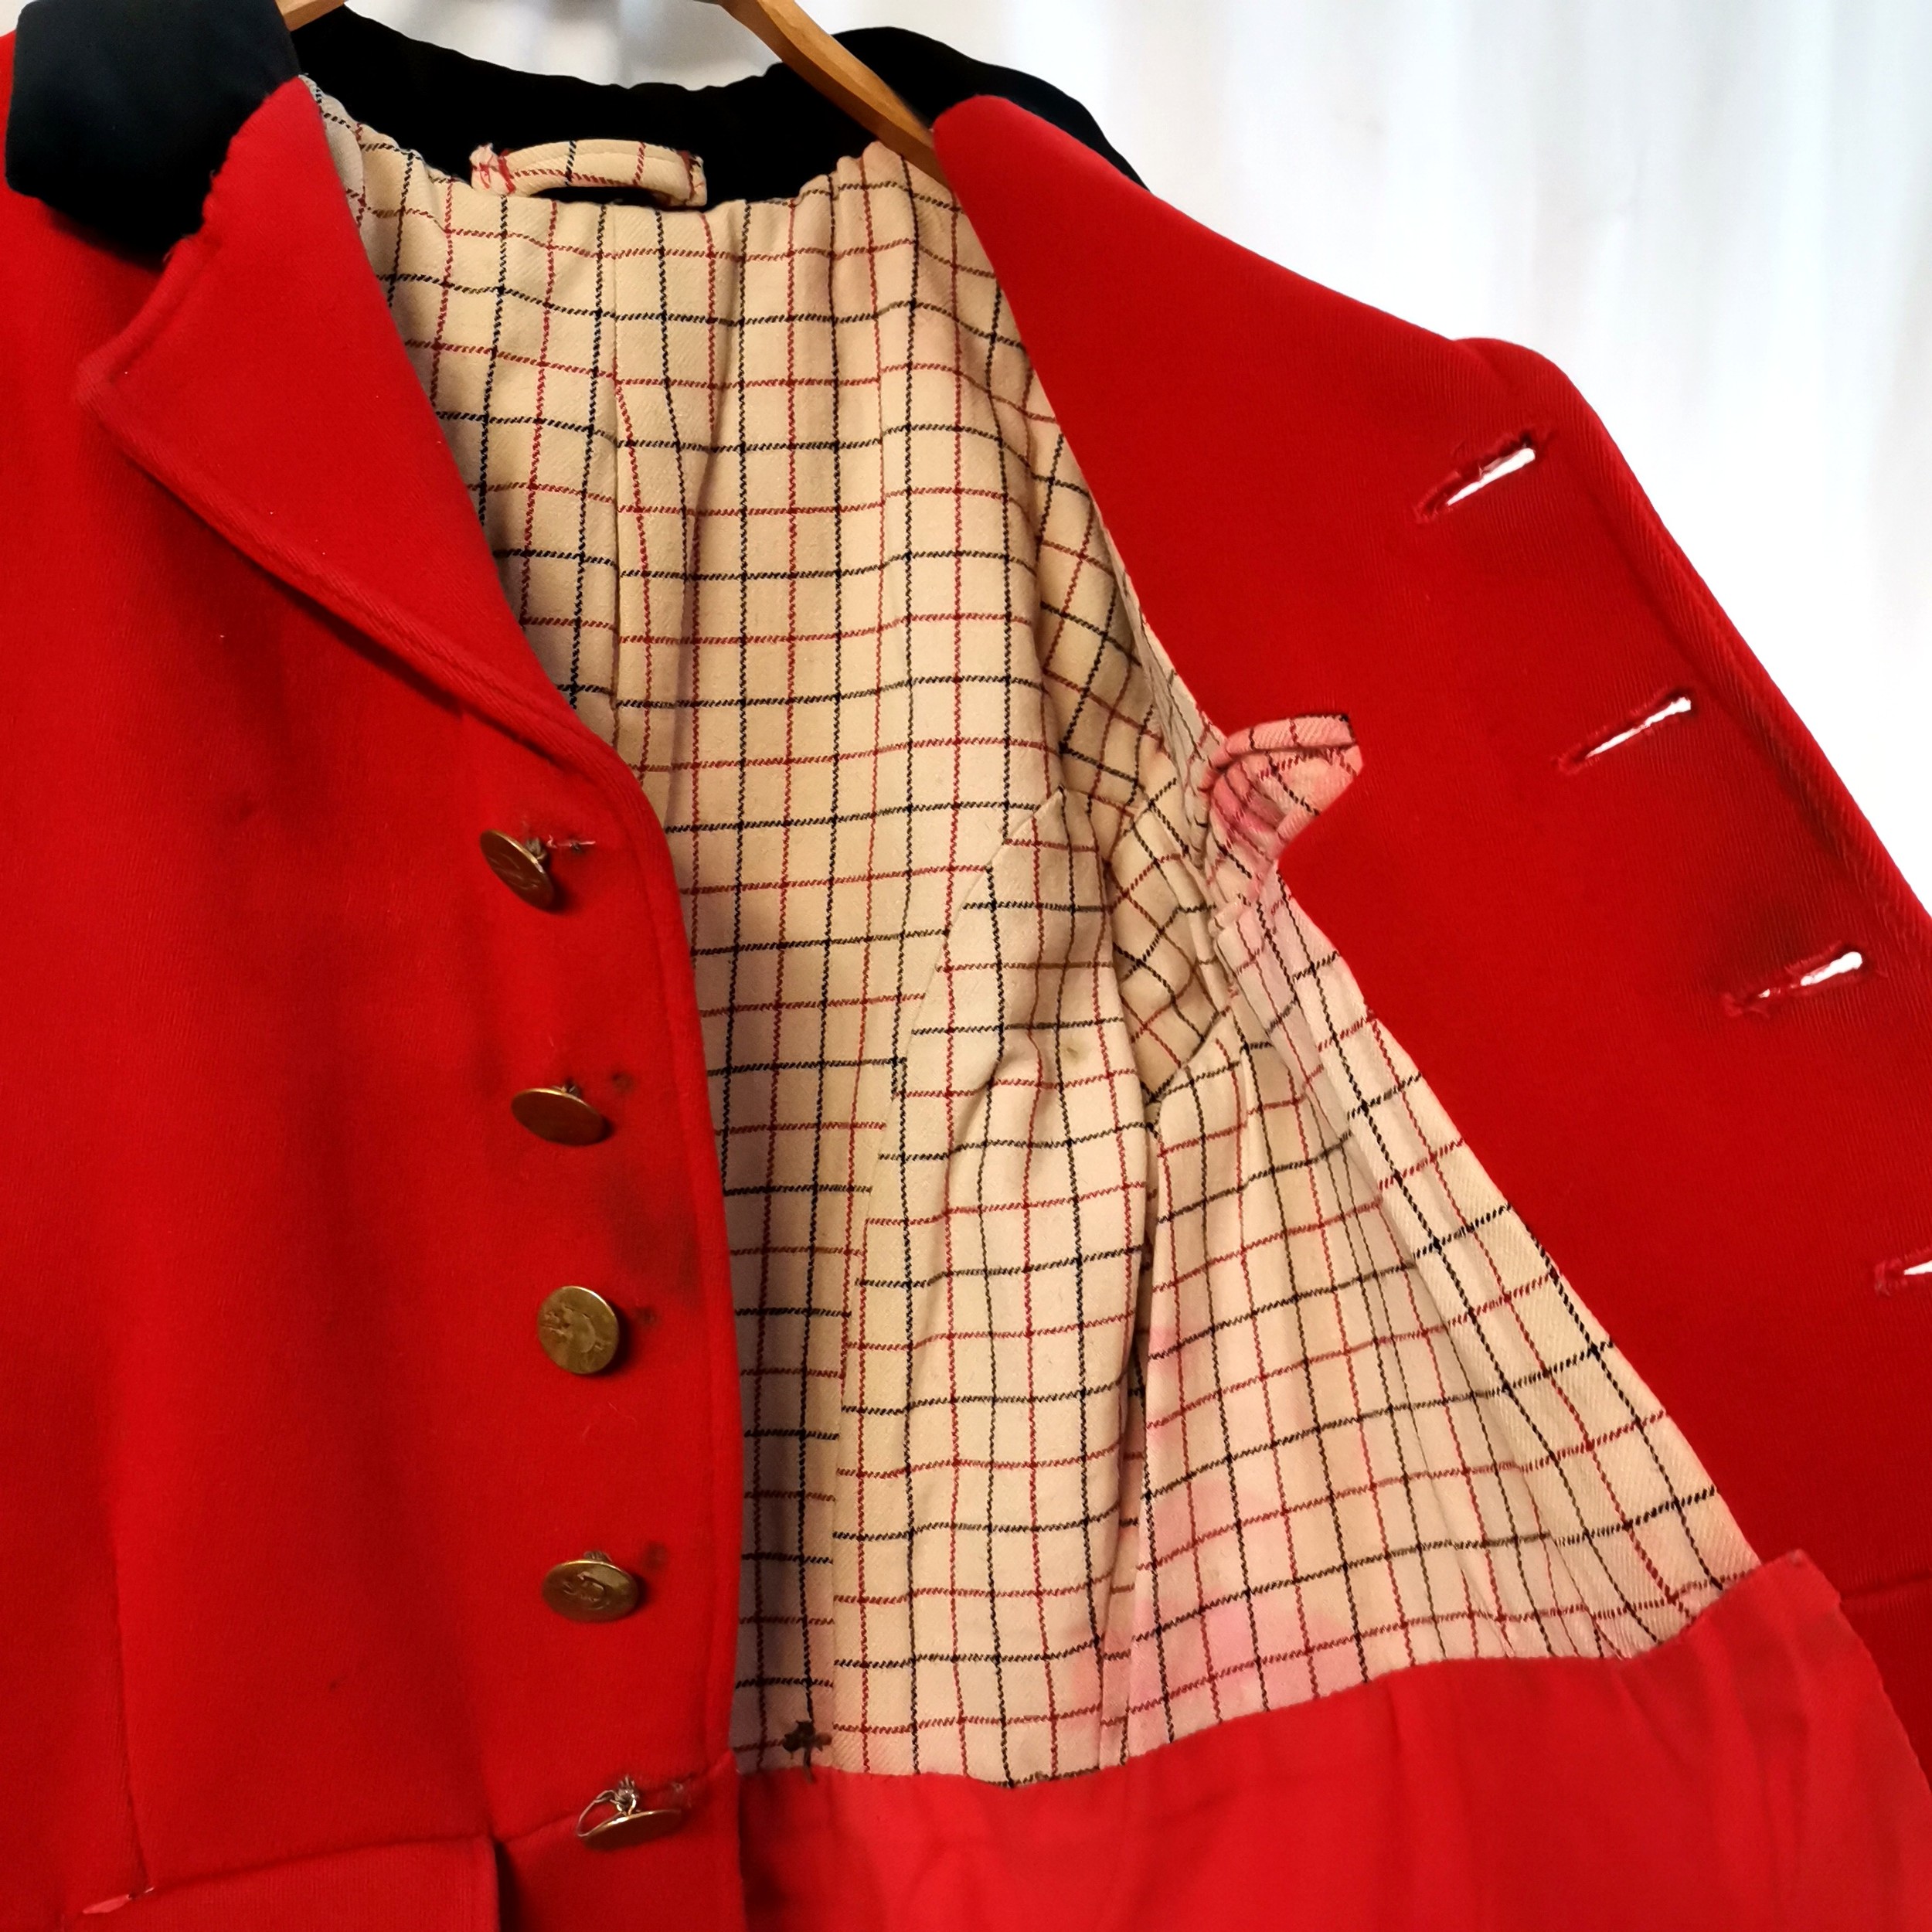 Vintage red hunting jacket with black velvet collar by Samuel Taylor with 5 brass buttons - 48cm - Image 5 of 6